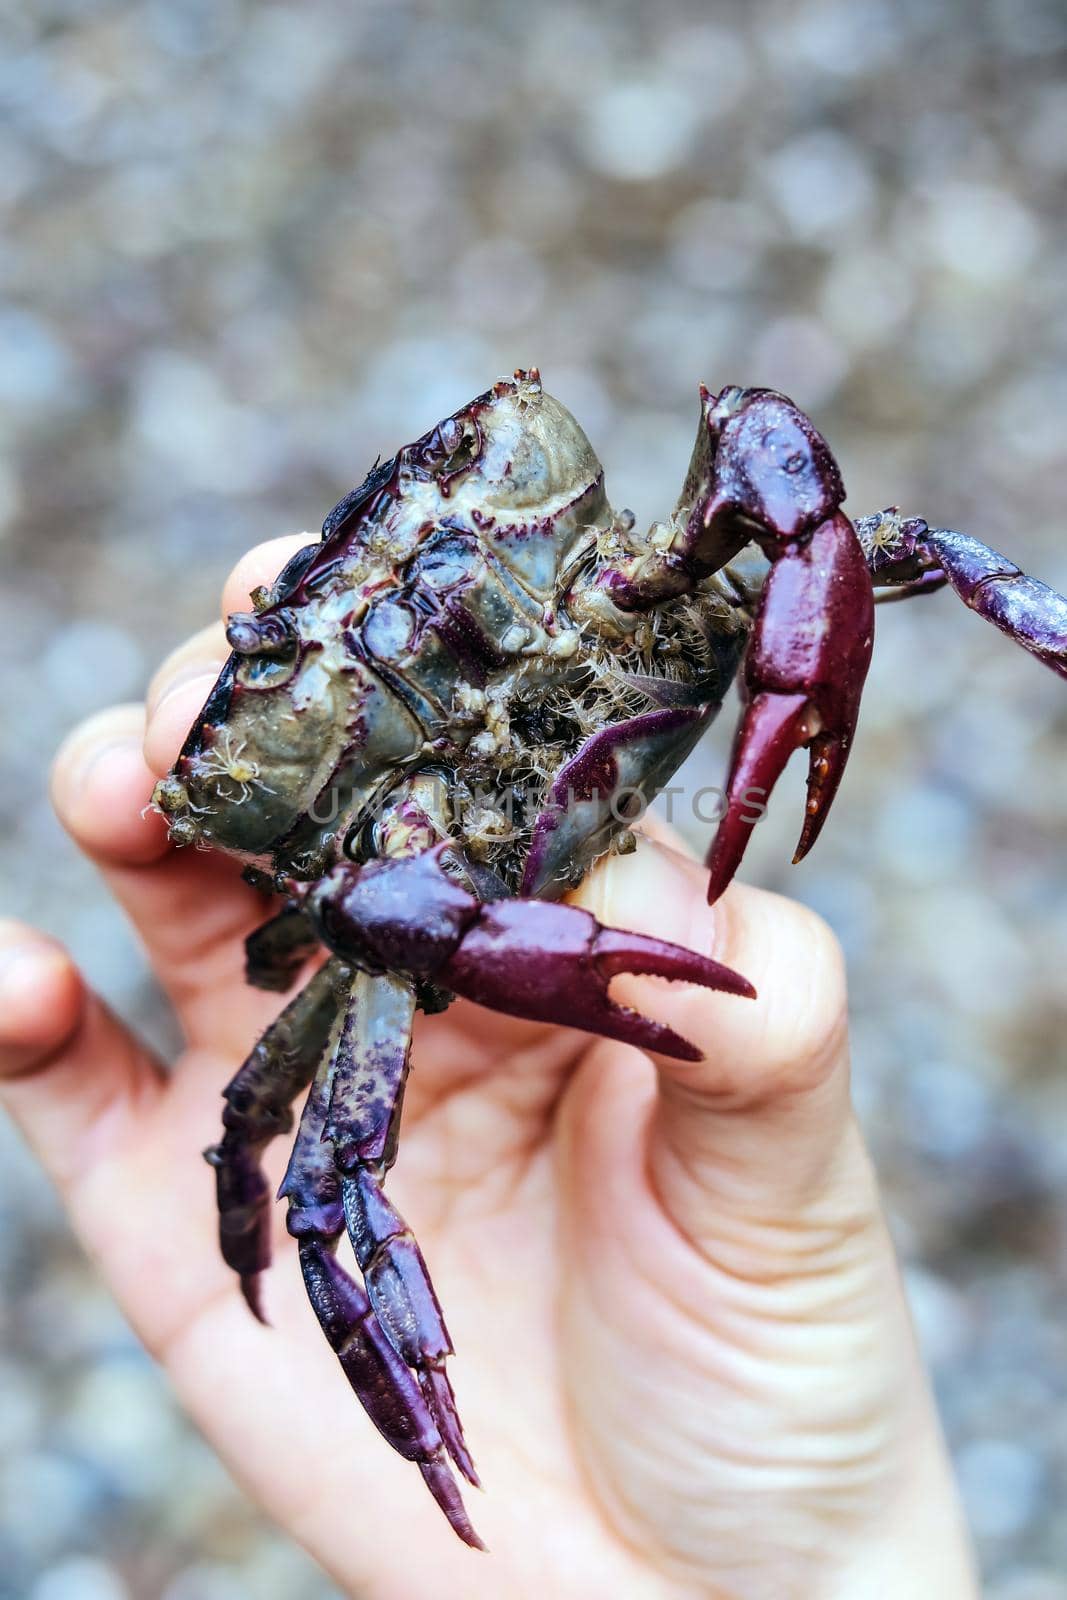 Image of Field crab in hand by ponsulak